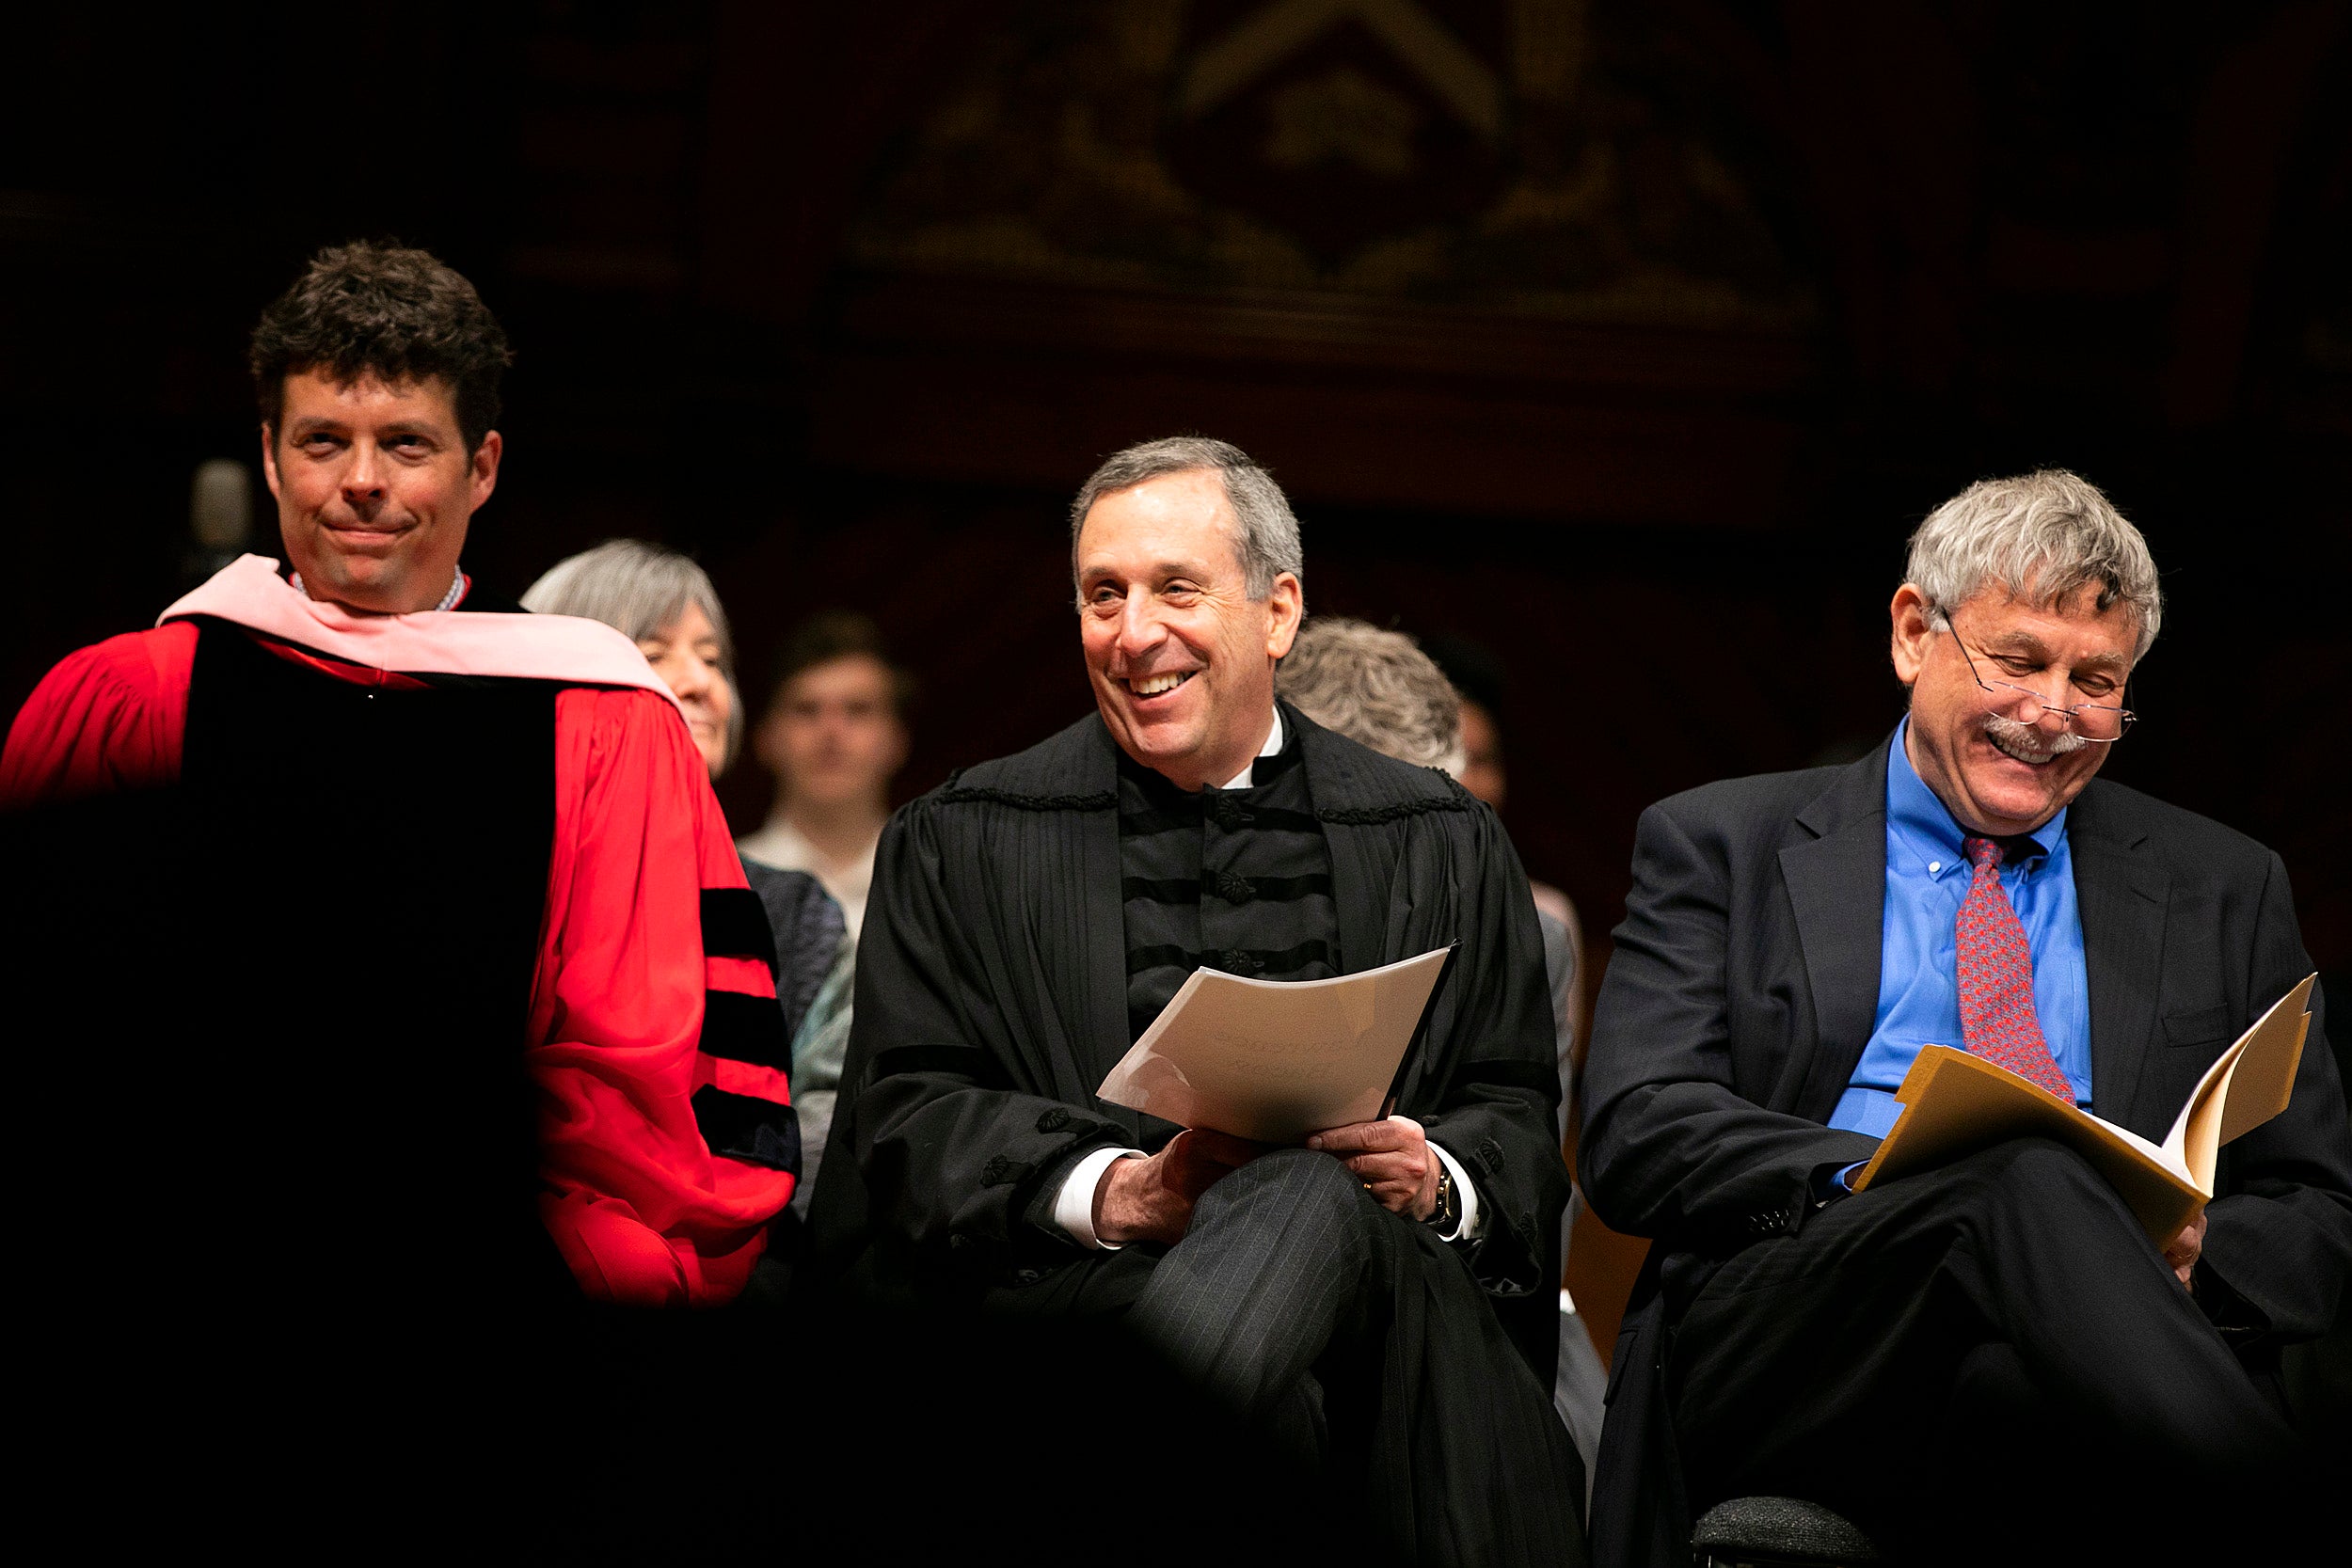 Director of Choral Activities and Senior Lecturer on Music Andrew Clark (from left), University President Larry Bacow, and Eric Lander sitting together.